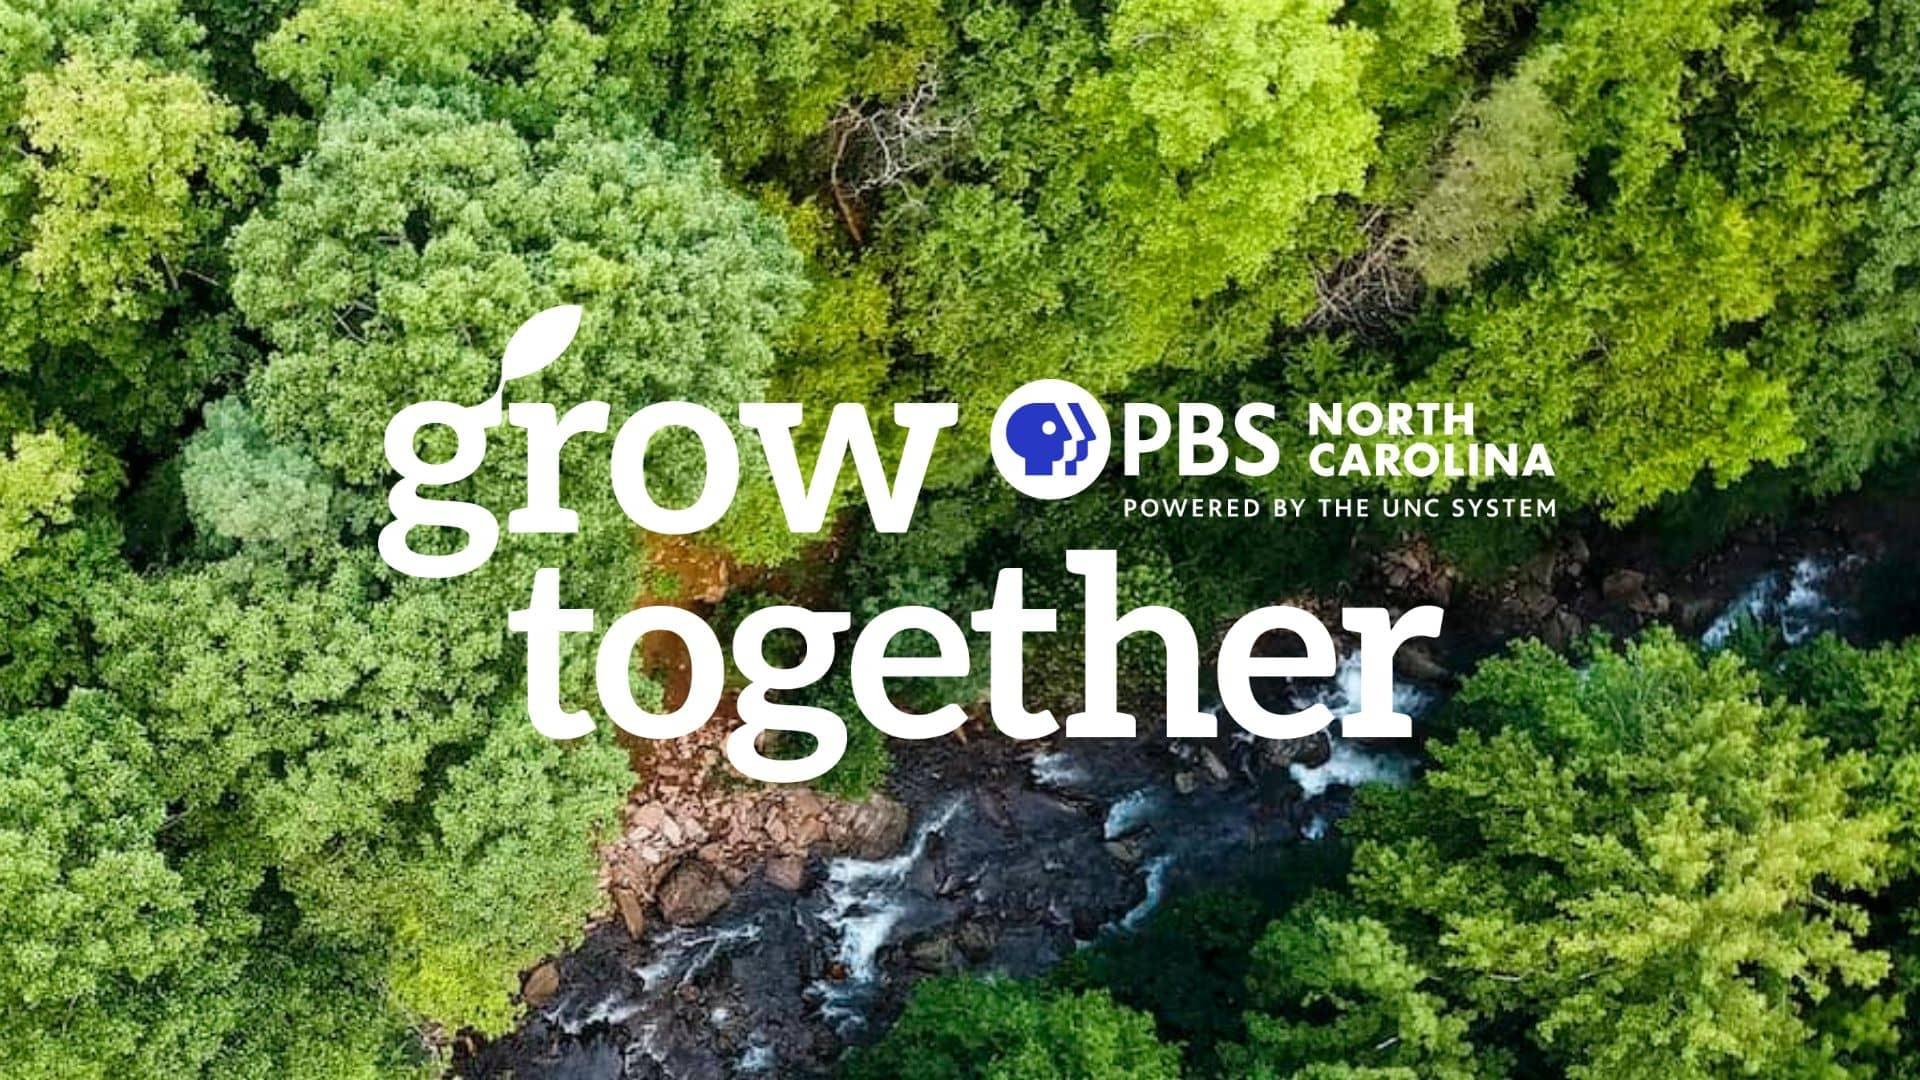 Grow together PBS logo on forest background.